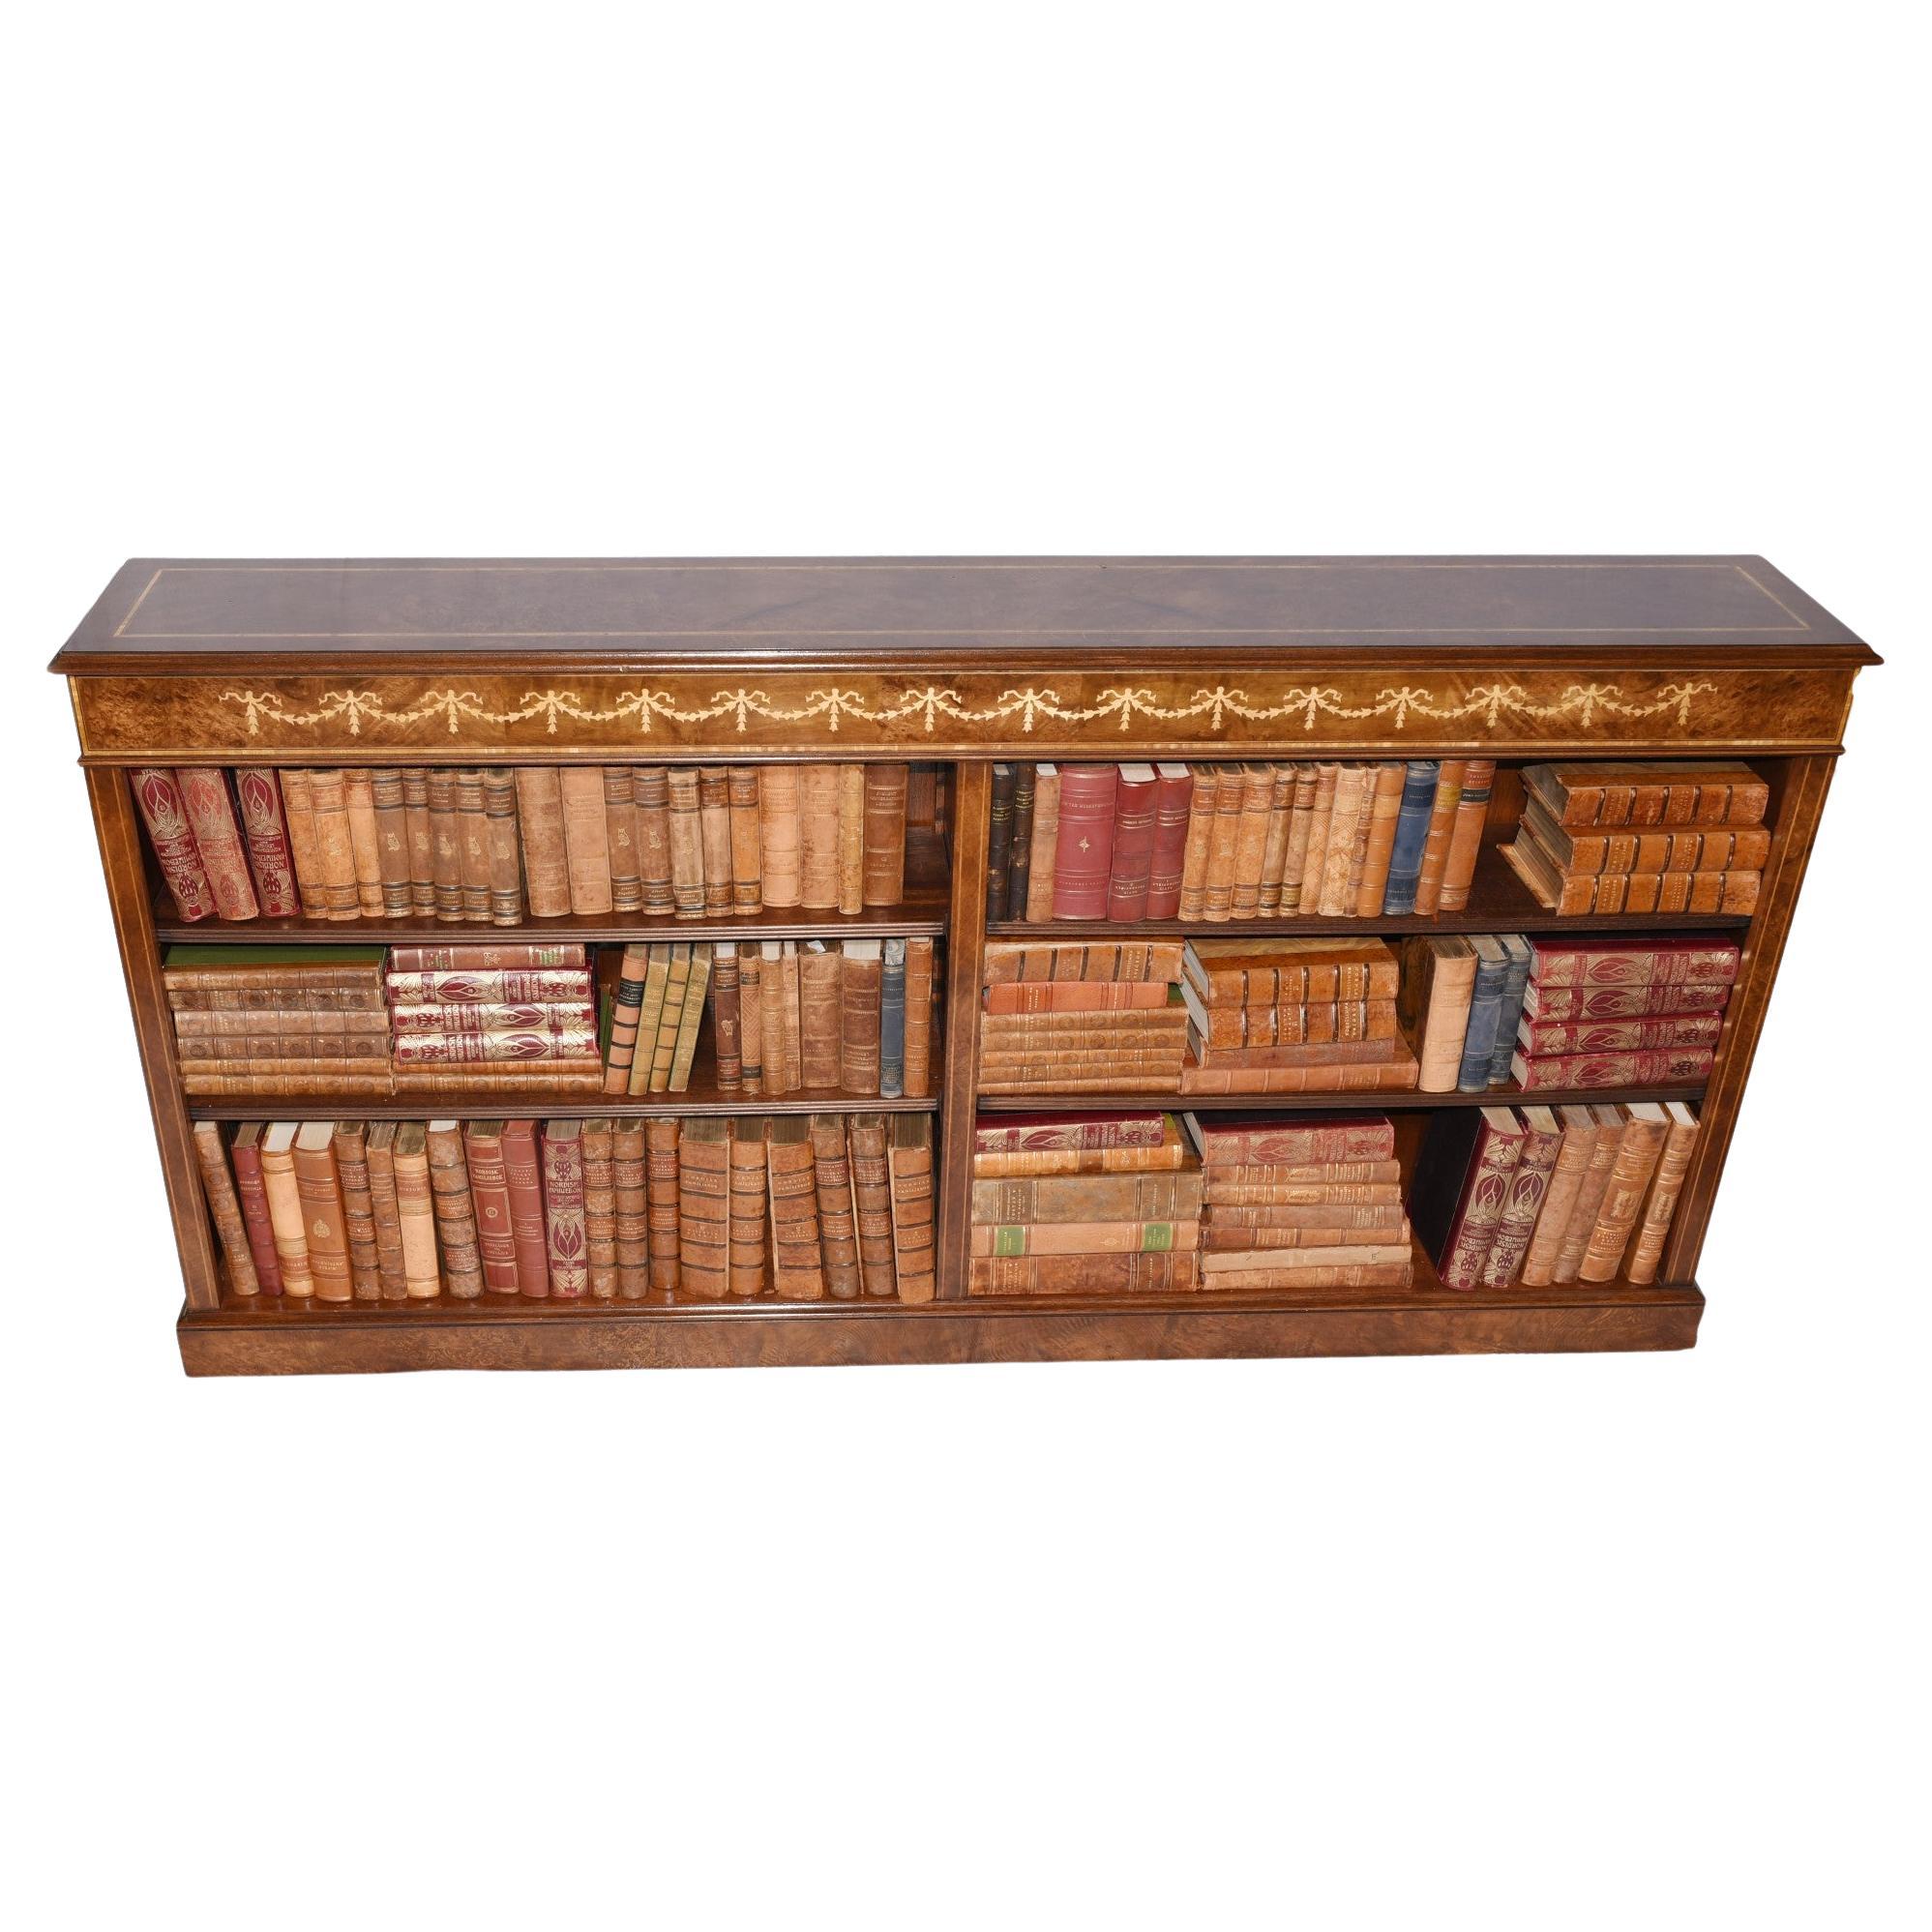 Walnut Open Bookcase, Regency Inlay Bookcases Study Interiors For Sale